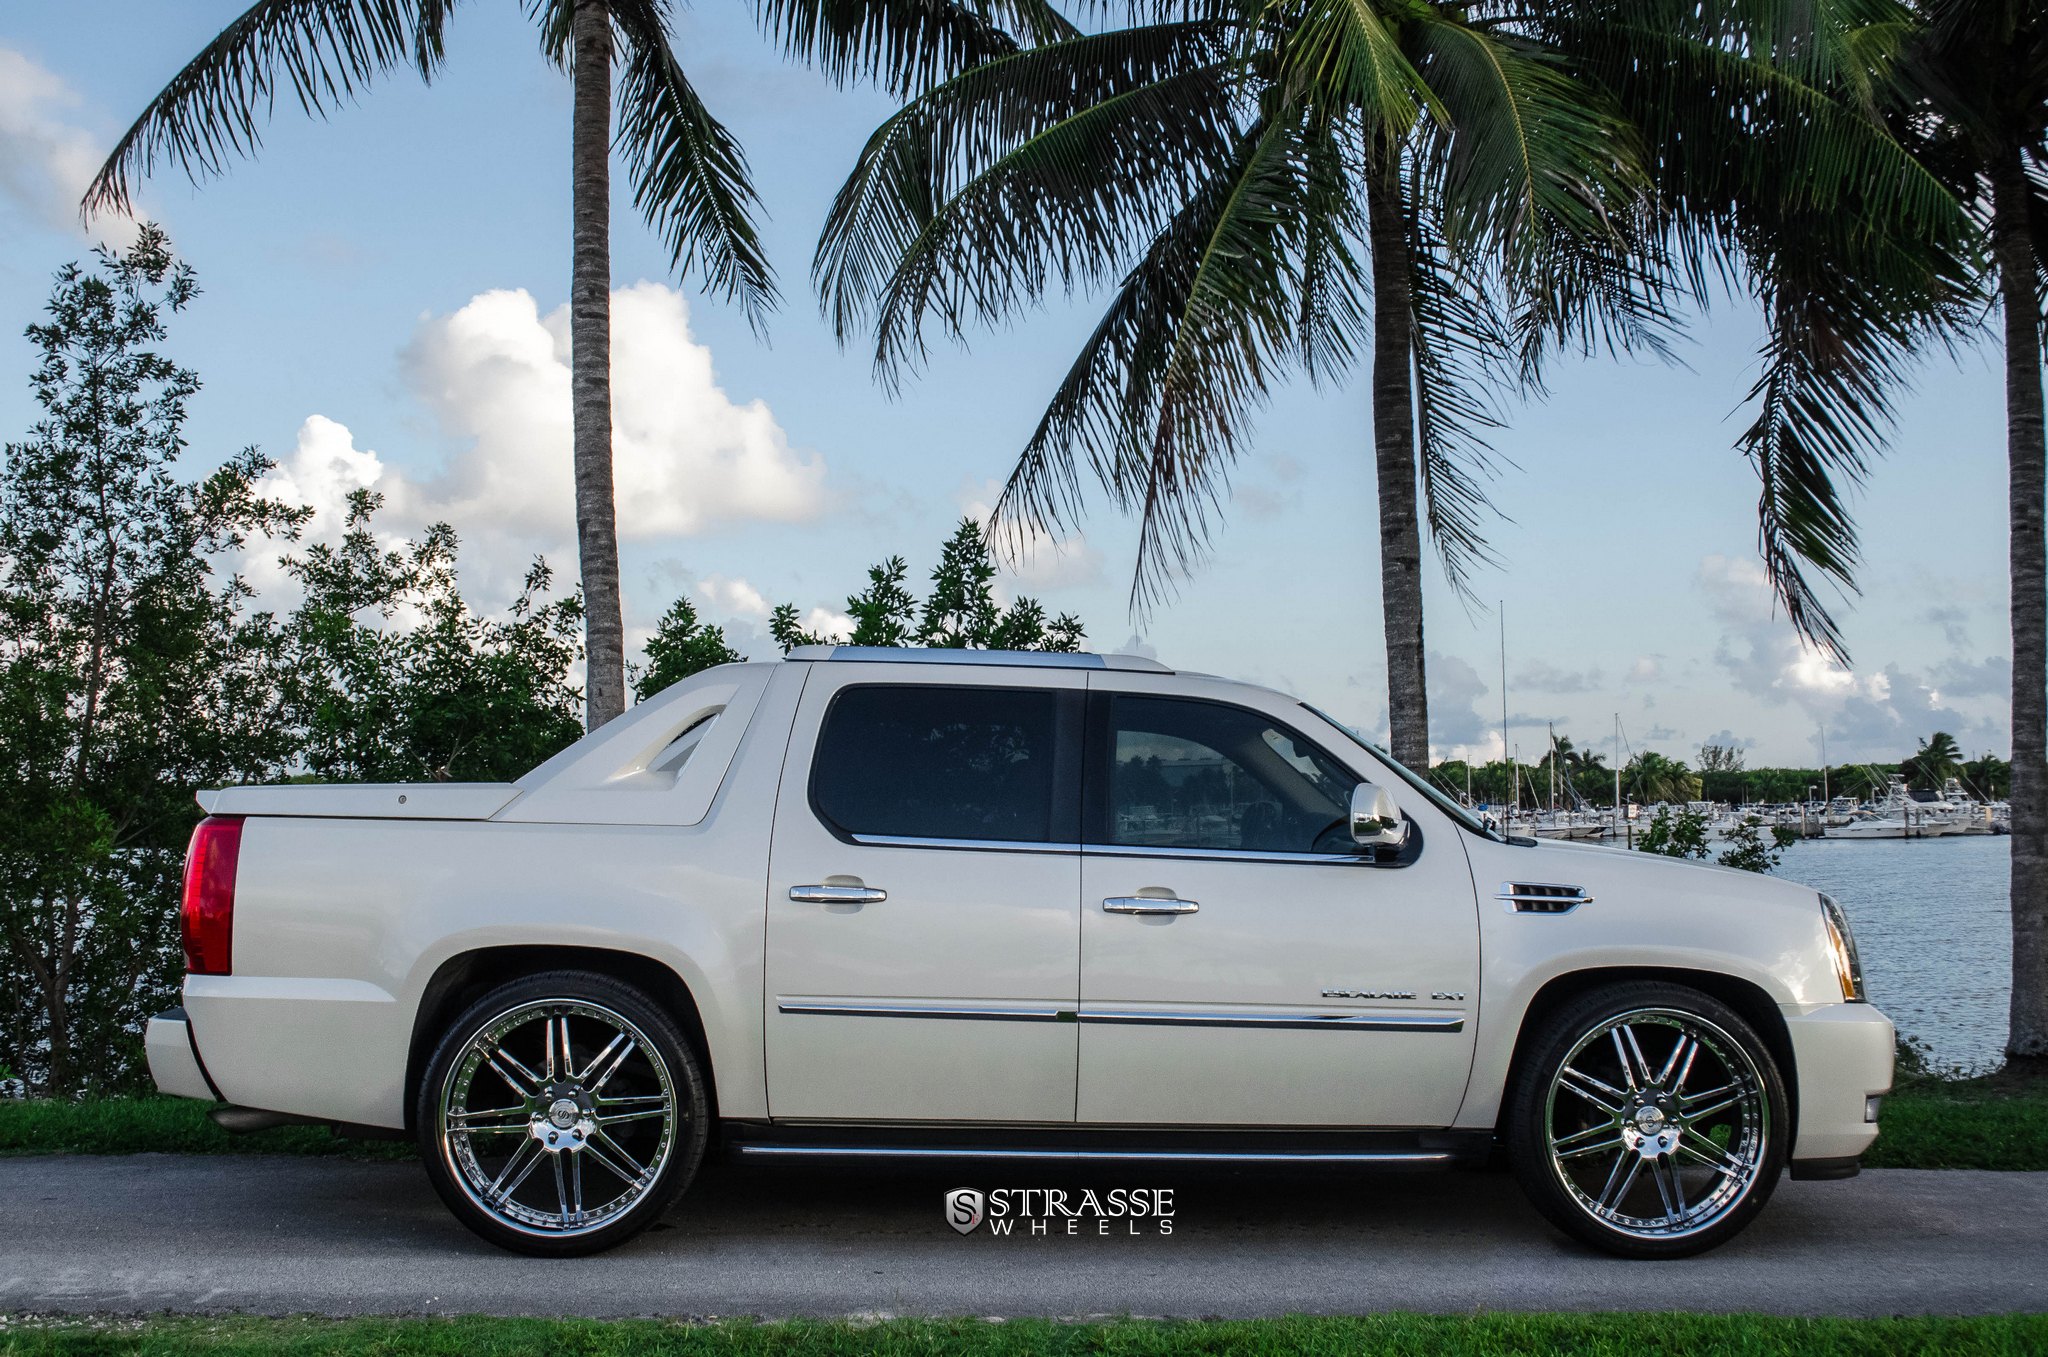 Chrome Strasse Wheels on White Cadillac Escalade EXT - Photo by Strasse Forged